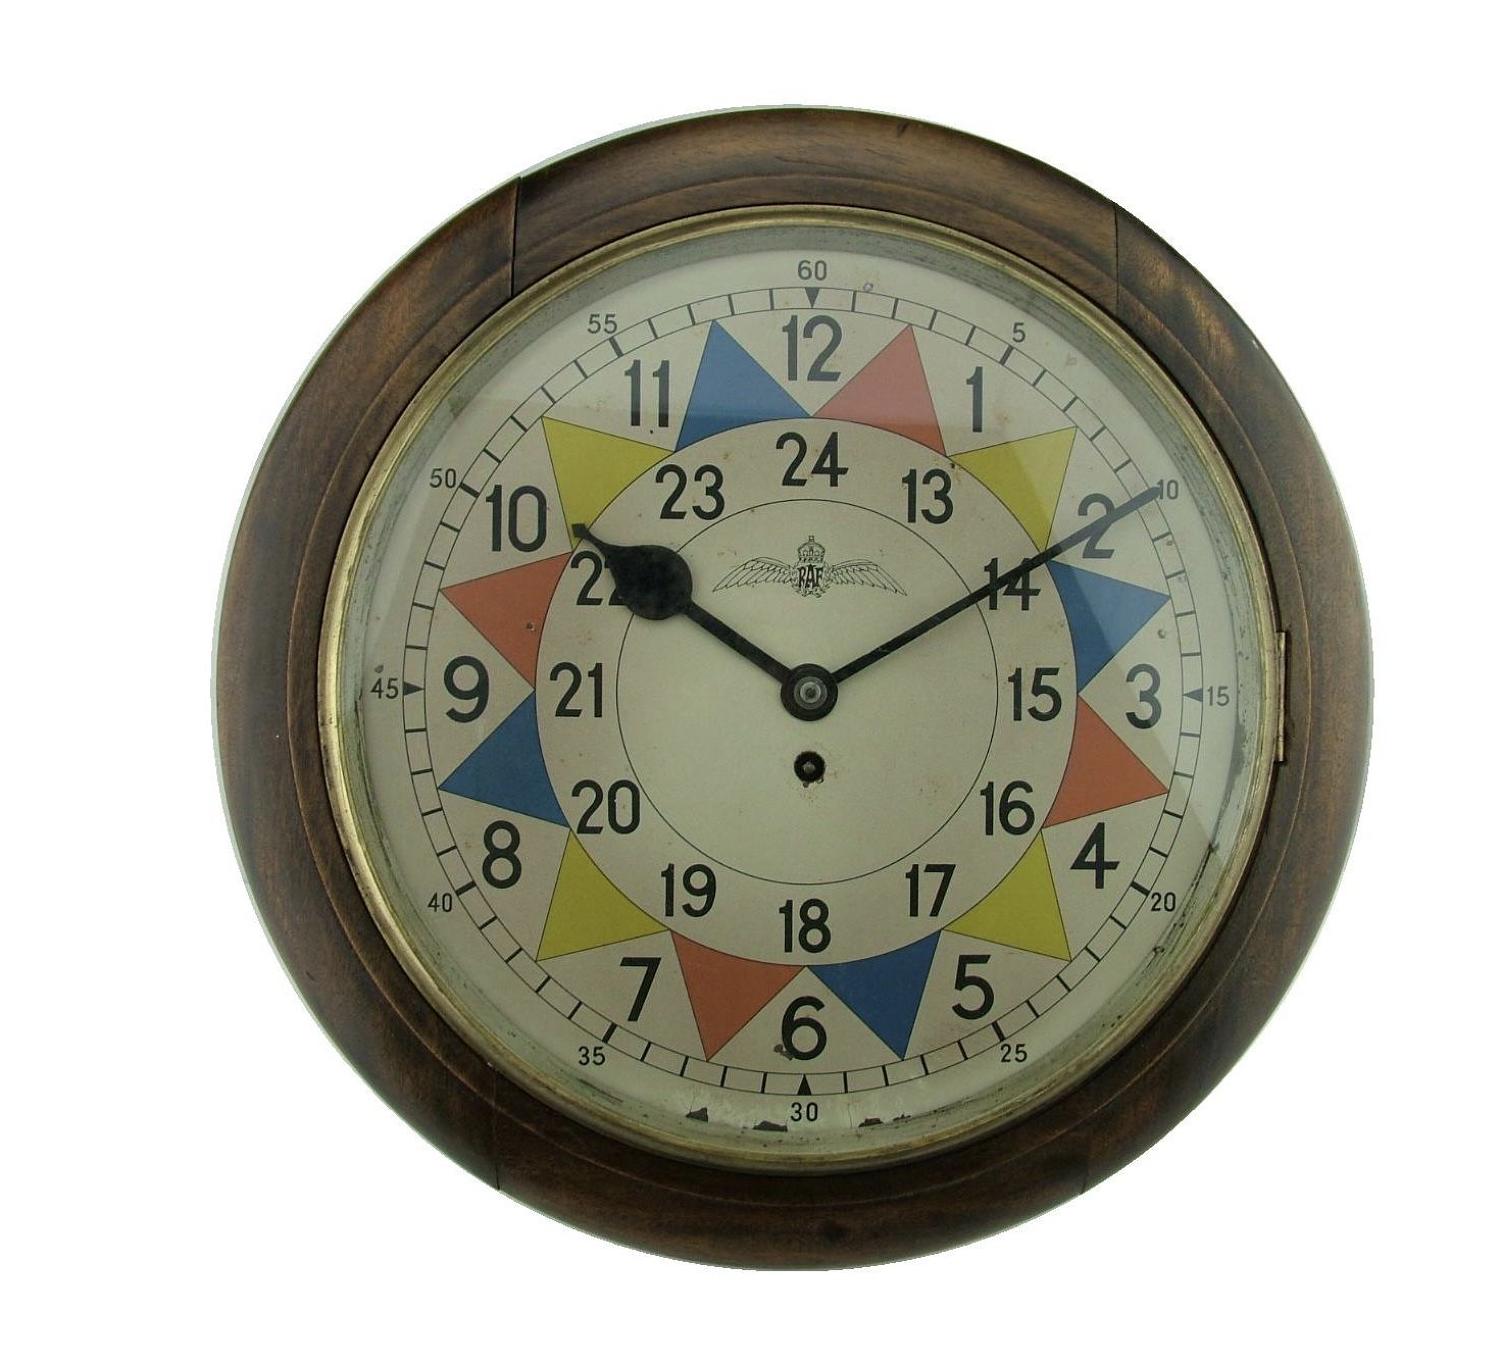 RAF station Type 1 Sector clock with rare dial